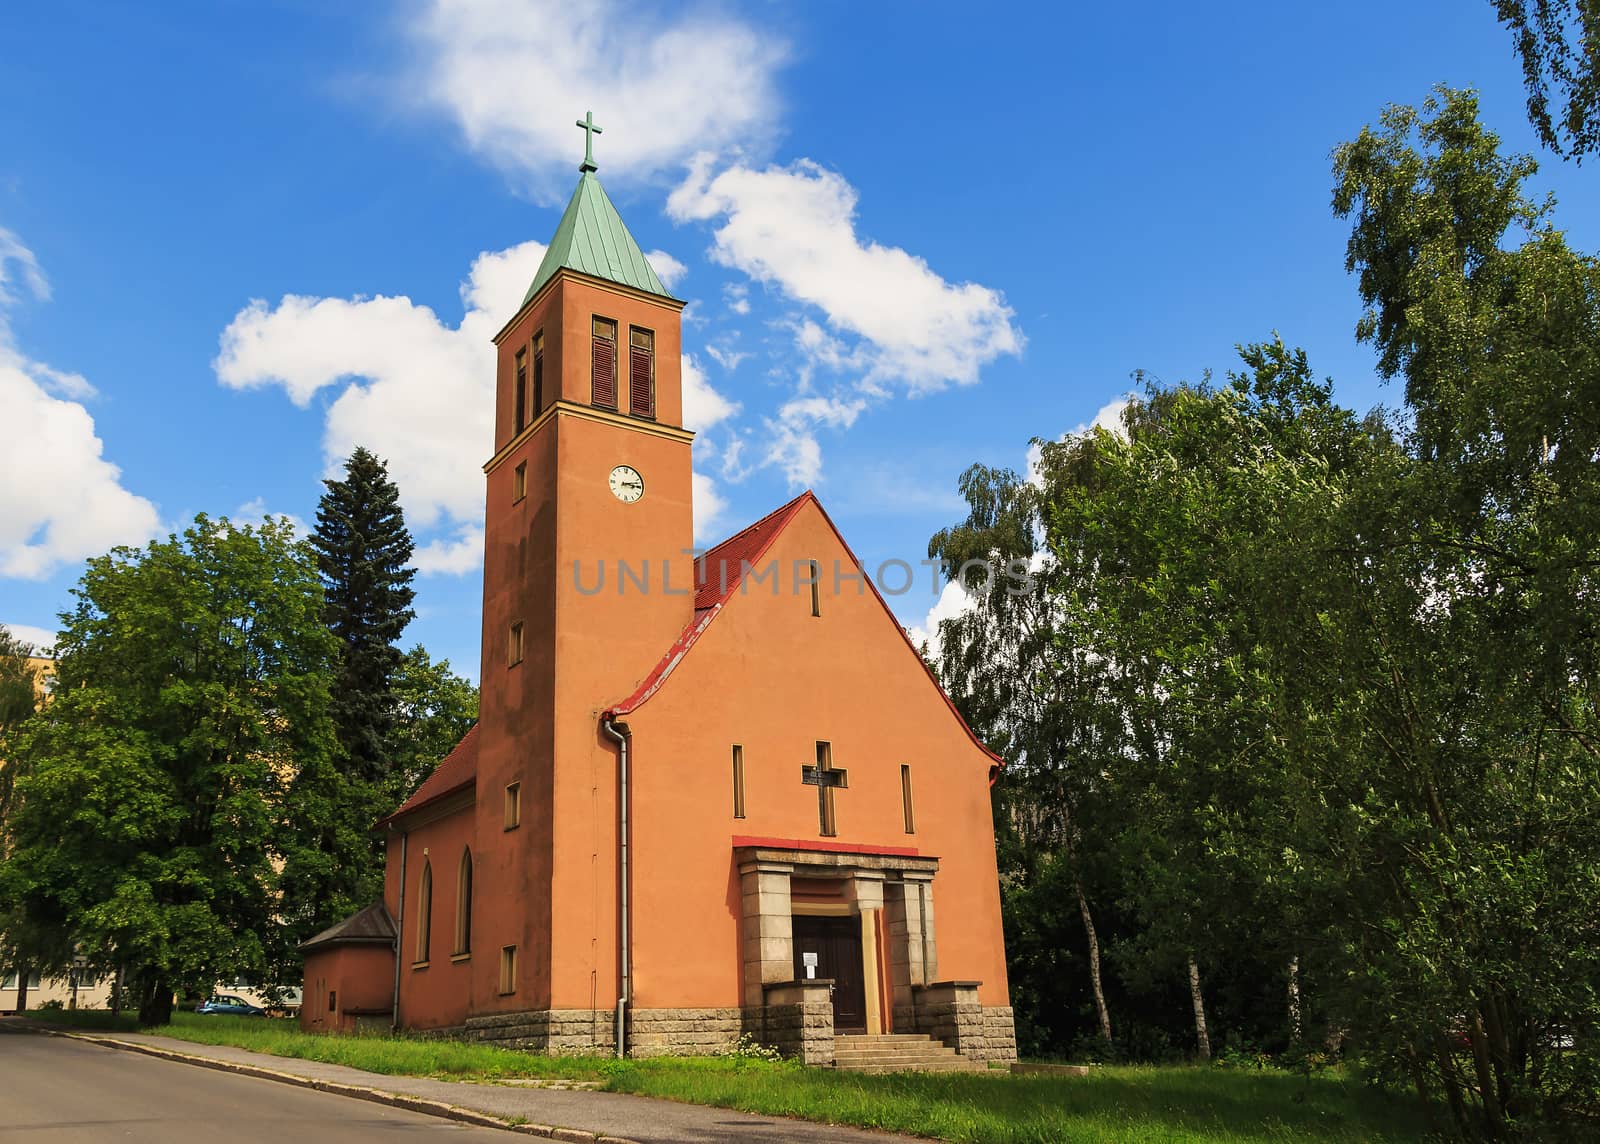 Taken June 18, 2016 Jablonec nad Nisou Czech Republic church of the thirties of the 20th century, standing next to the road in the background trees and sky